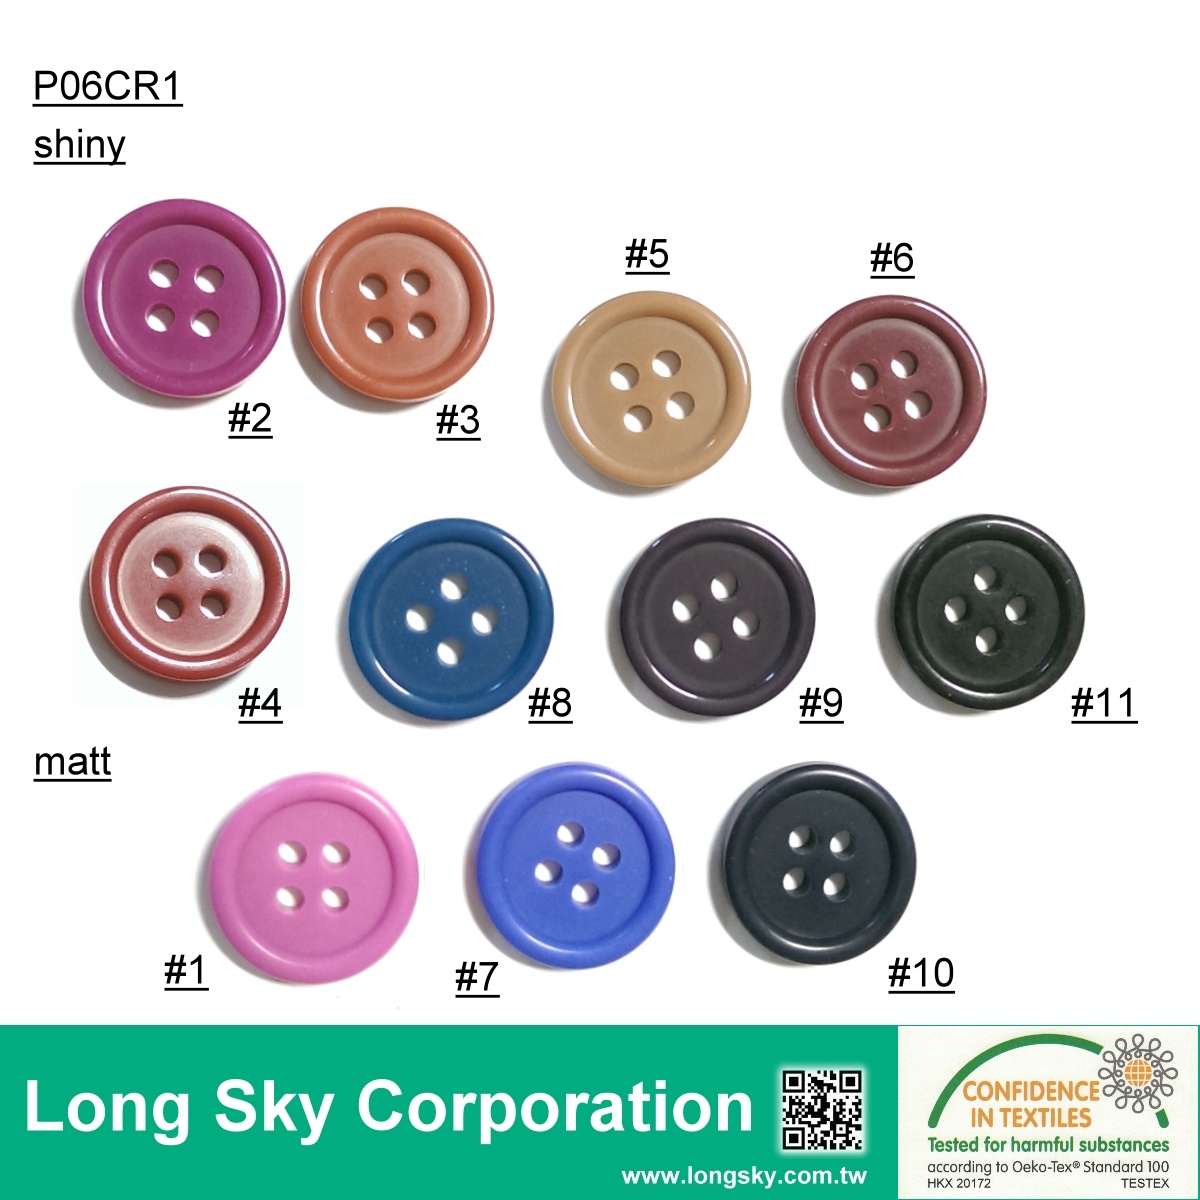 (#P06CR1-8) 15mm cyan color 4-hole polyester resin button for knit wear